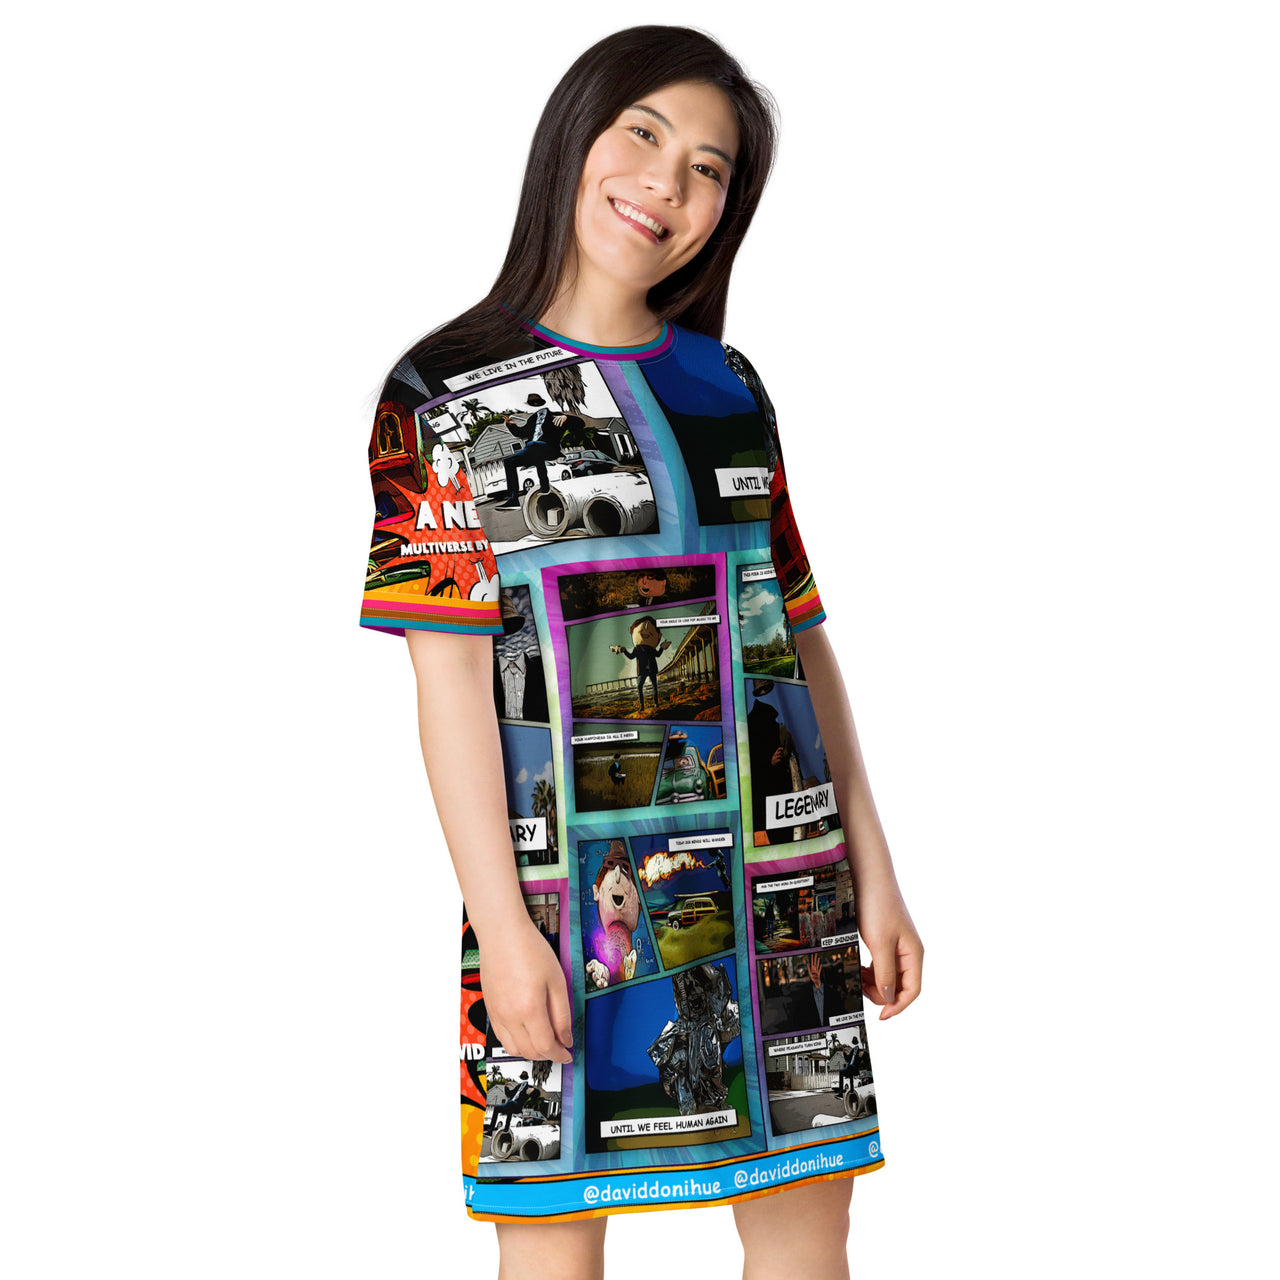 T-shirt dress of The Poetry Verse Multi-Verse Poems Series by David N Donihue